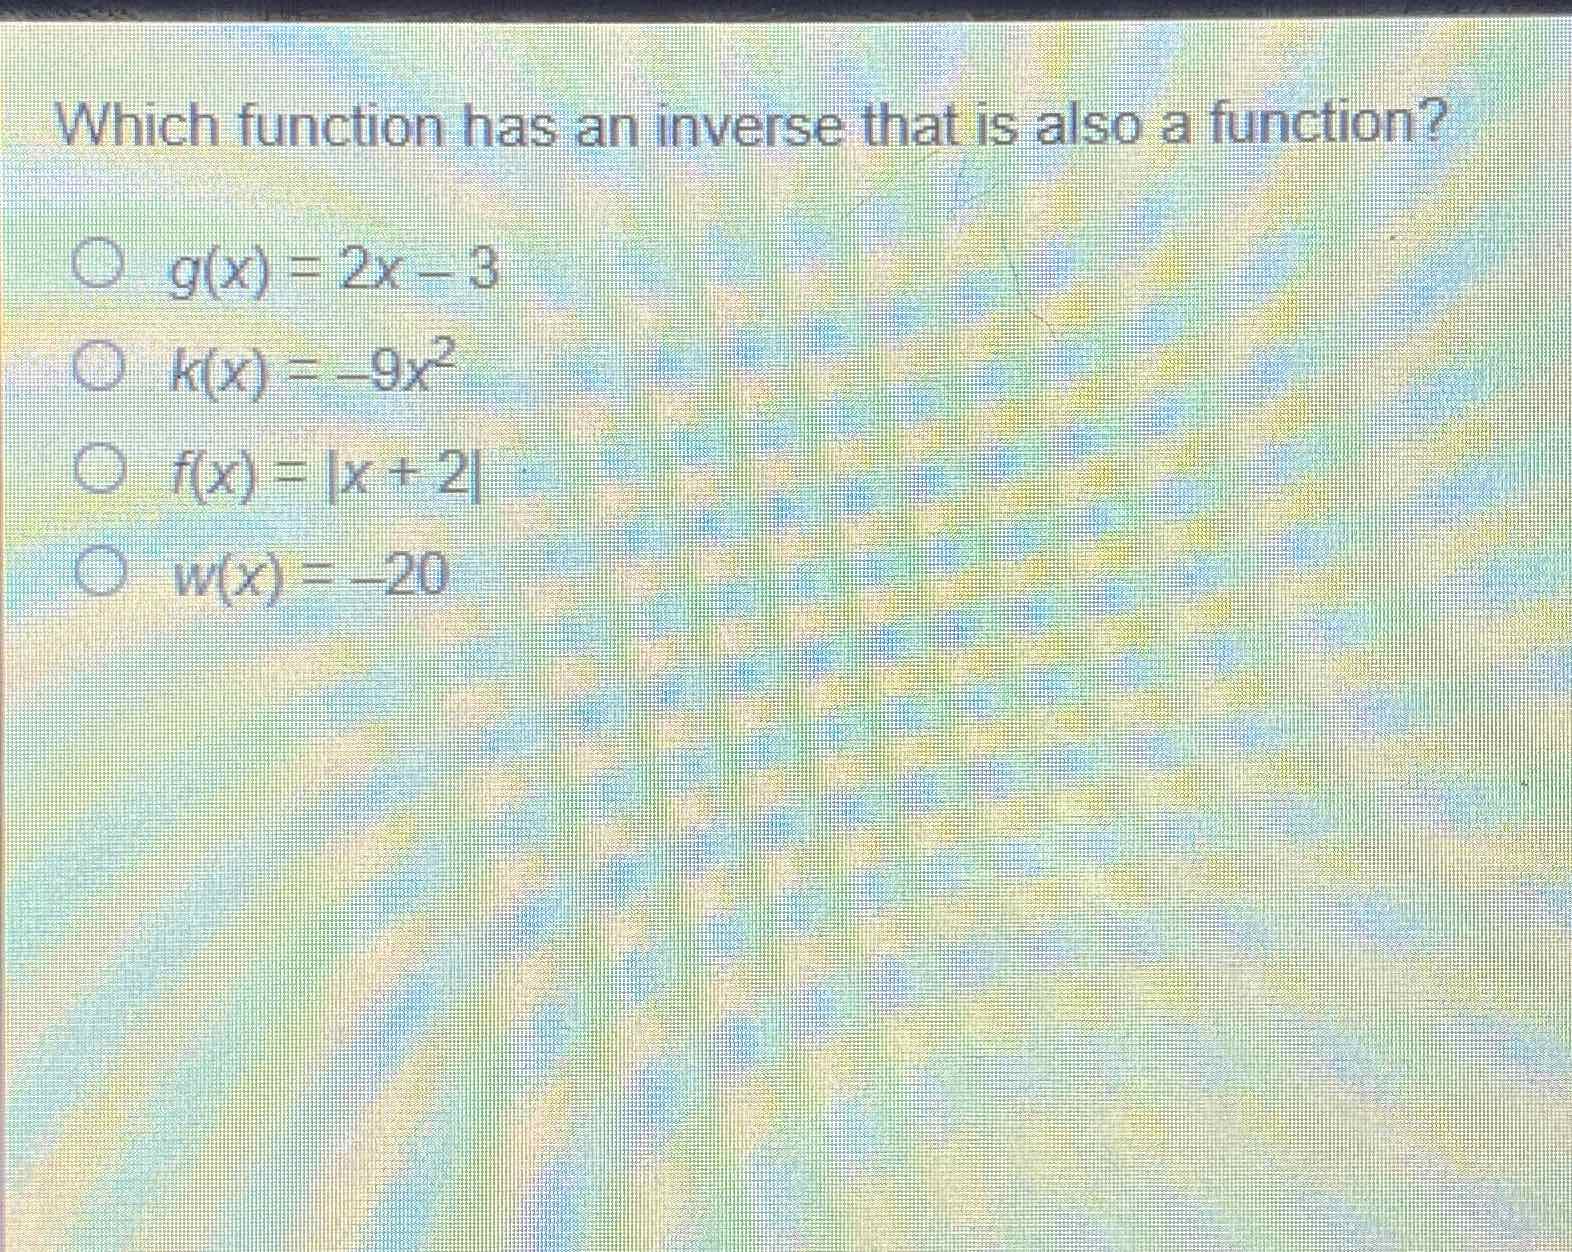 Which function has an inverse that is also a function?
\( g(x)=2 x-3 \)
\( k(x)=-9 x^{2} \)
\( f(x)=|x+2| \)
\( w(x)=-20 \)